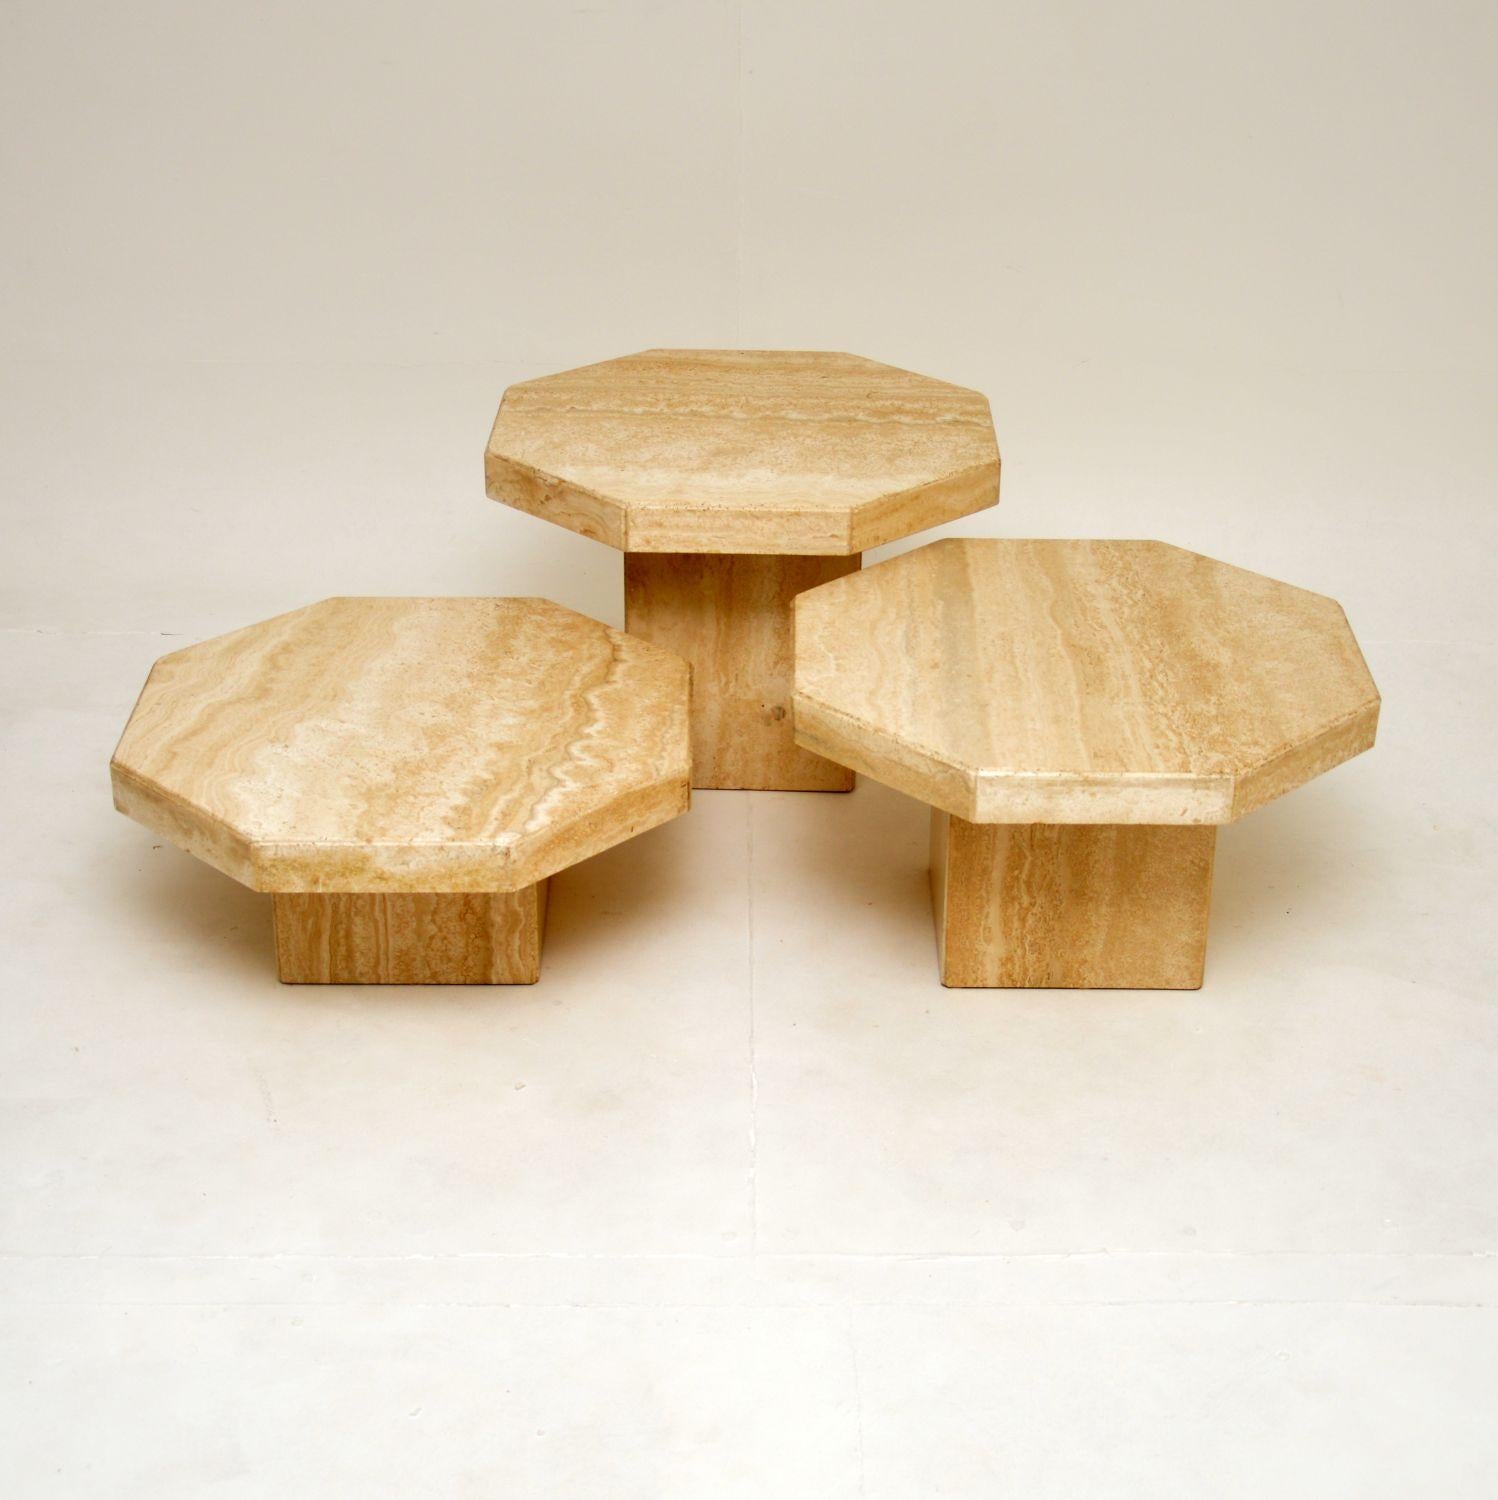 A beautiful set of Italian solid travertine coffee / side tables, dating from the 1970’s, made by Stone International.

They have a stylish and very useful design, the octagonal tops are all the same size and sit on pedestal bases of varying